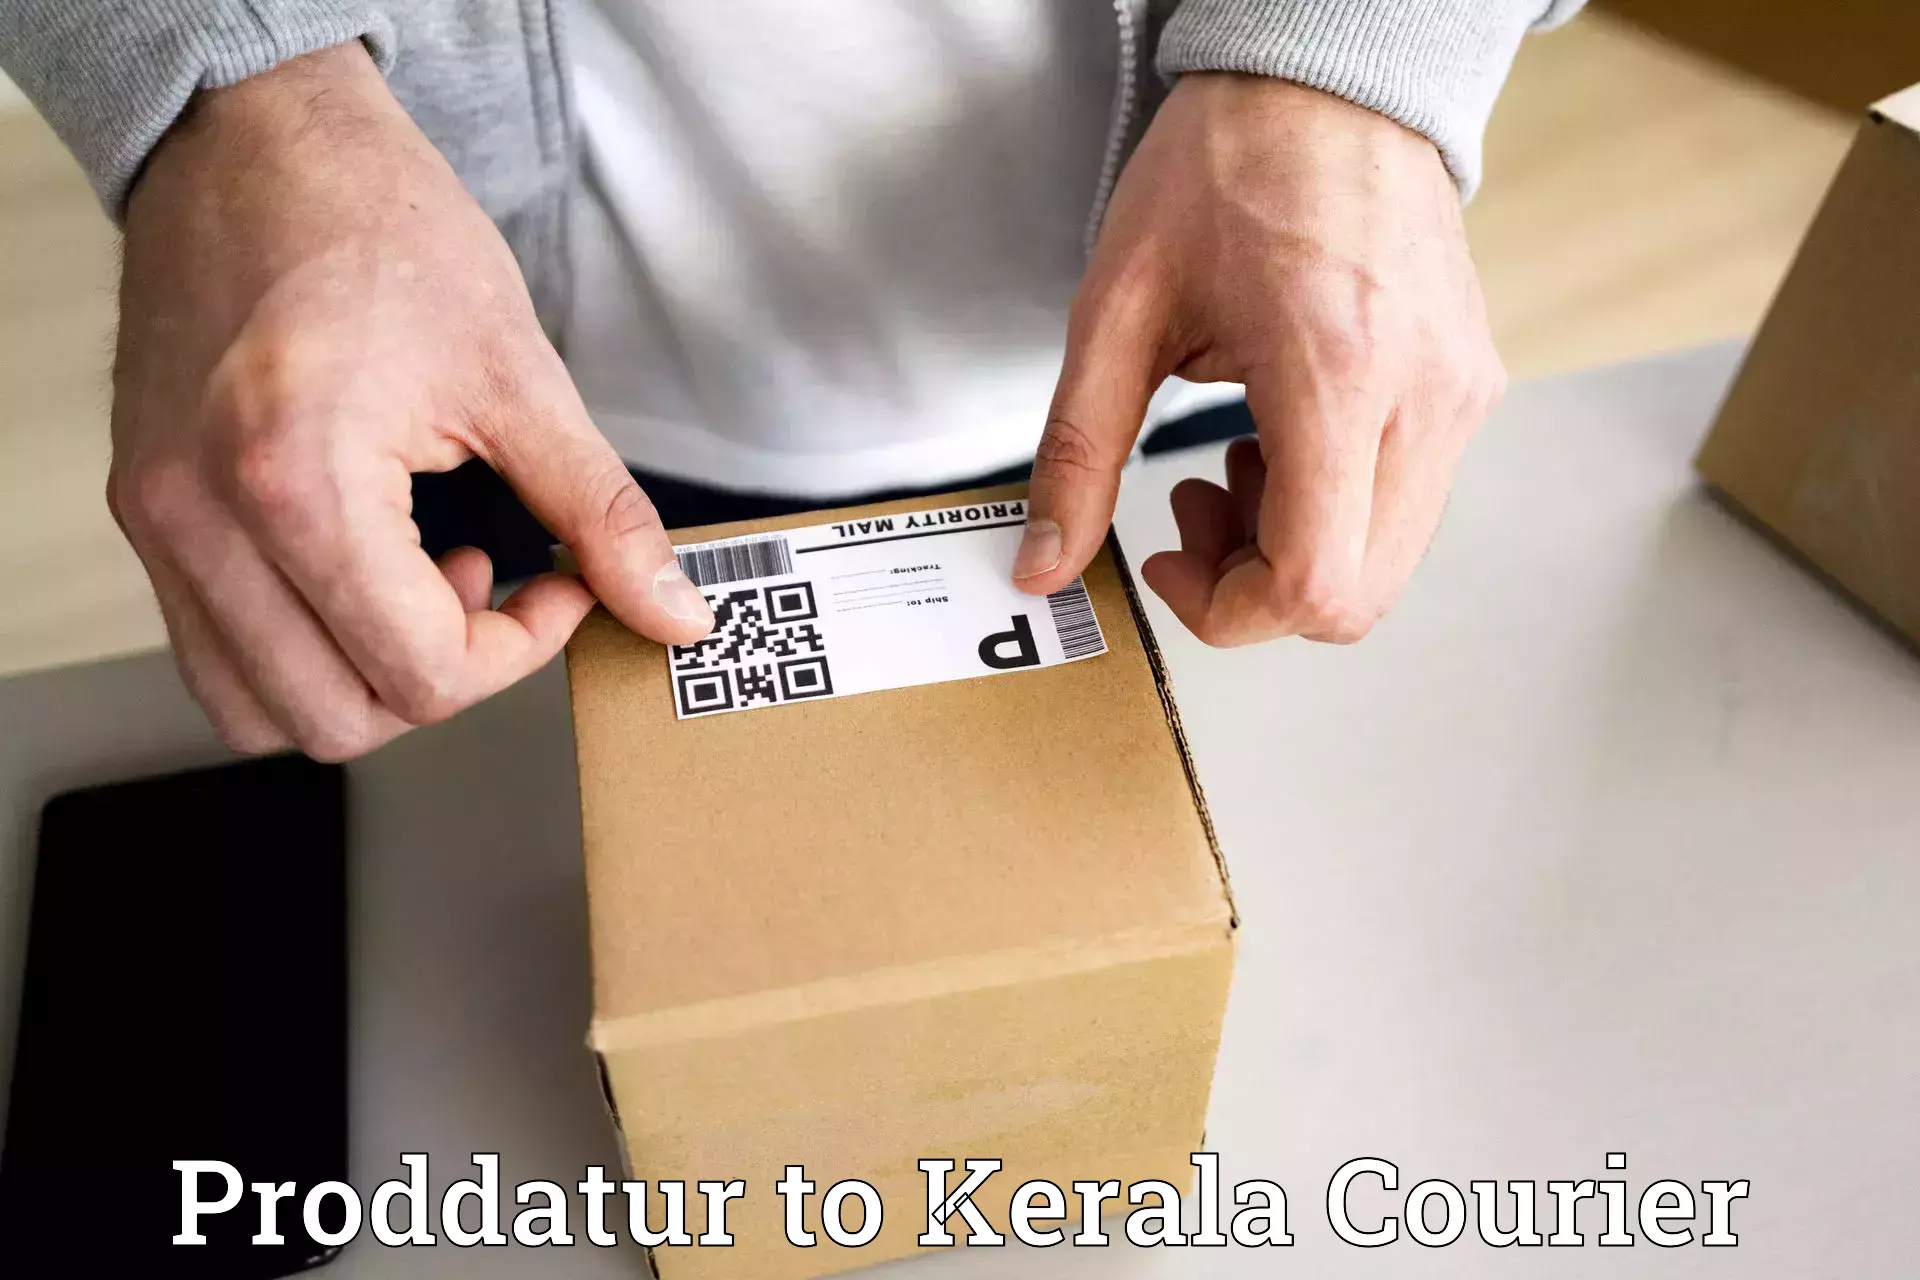 Optimized delivery routes Proddatur to Kerala